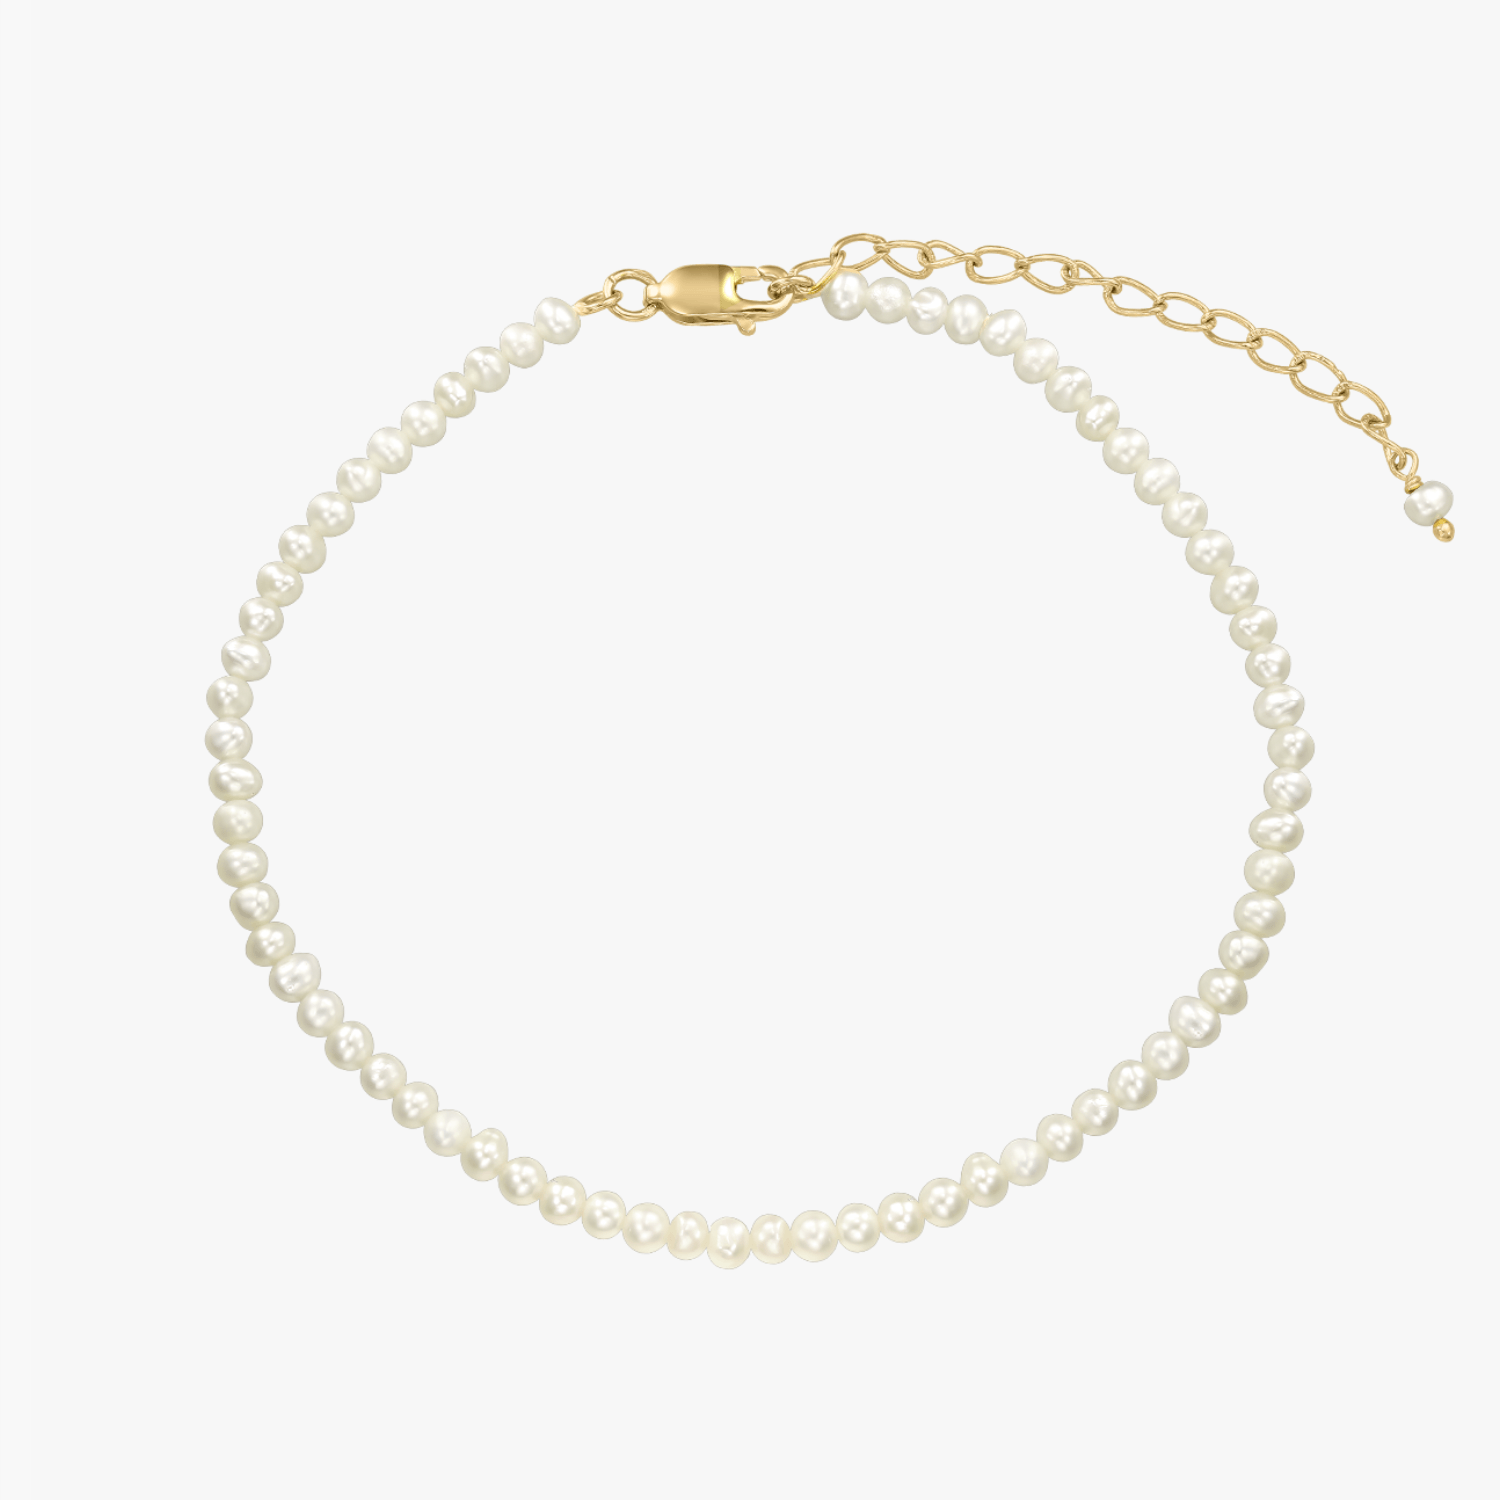 Finesse Silver Foot Bracelet - Natural Pearls